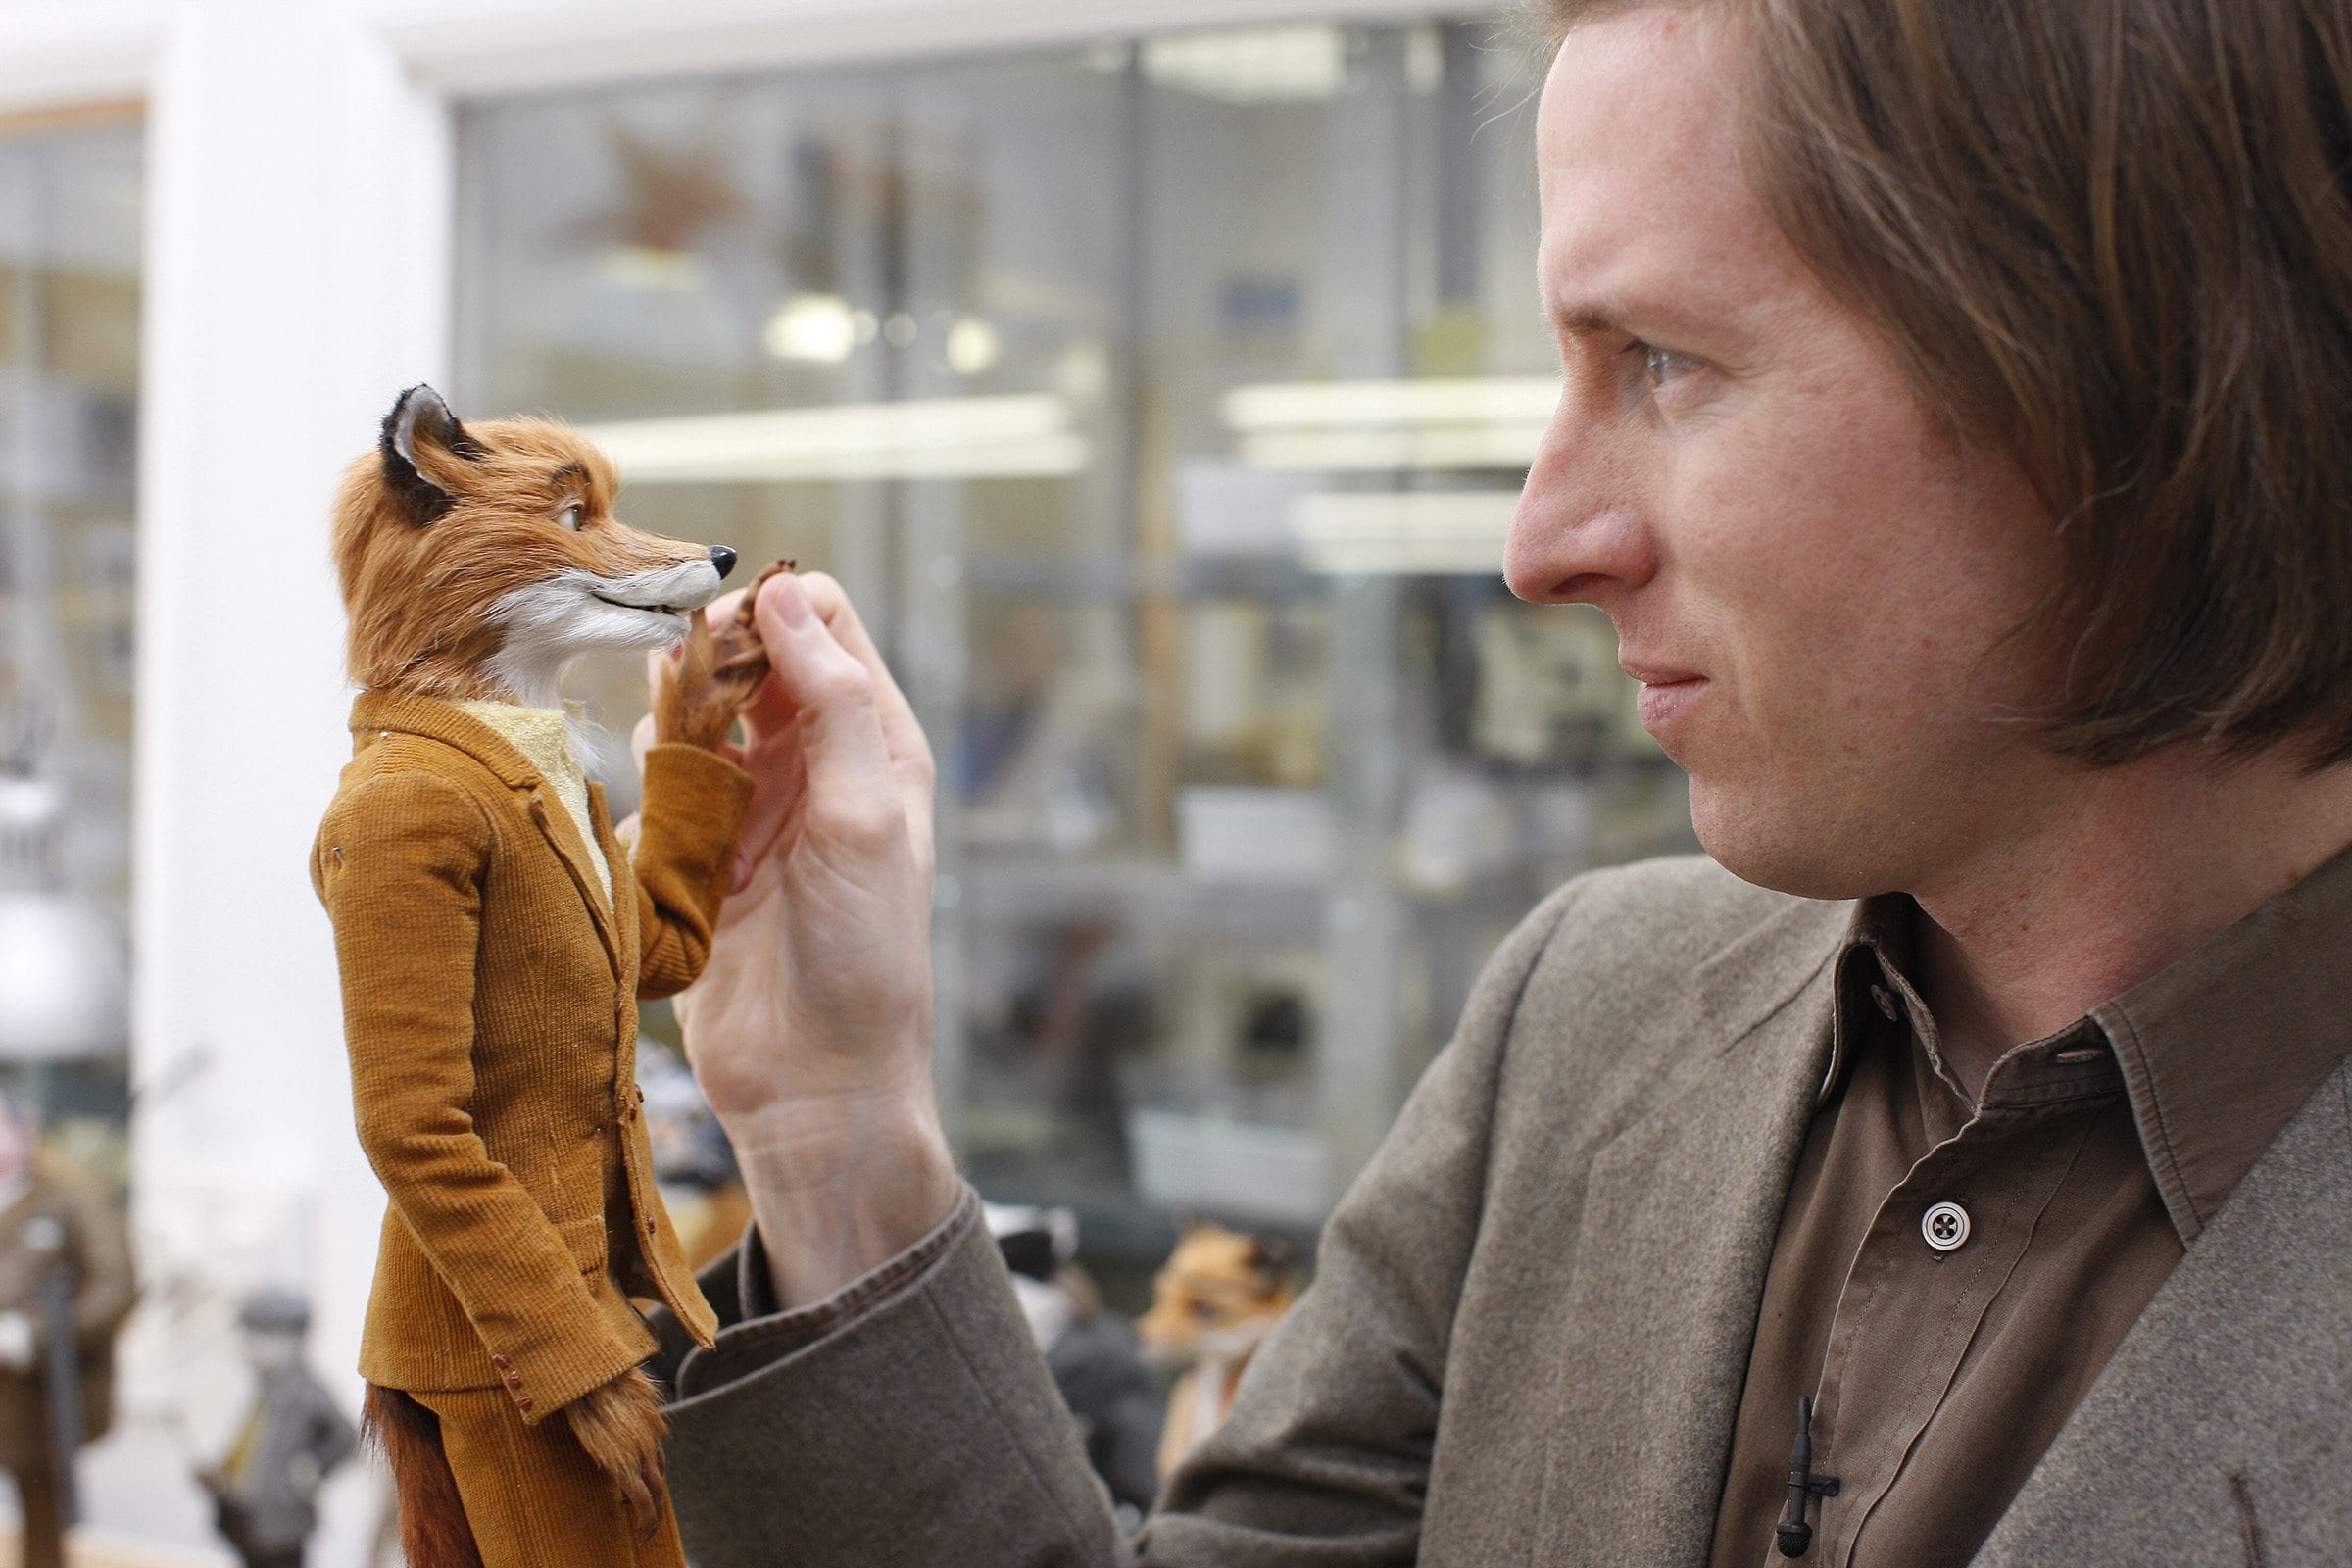 Fans of Wes Anderson will be happy to hear that his next film, 'Isle of Dogs', has been given a release date of April 20, 2018 by Fox Searchlight Pictures.